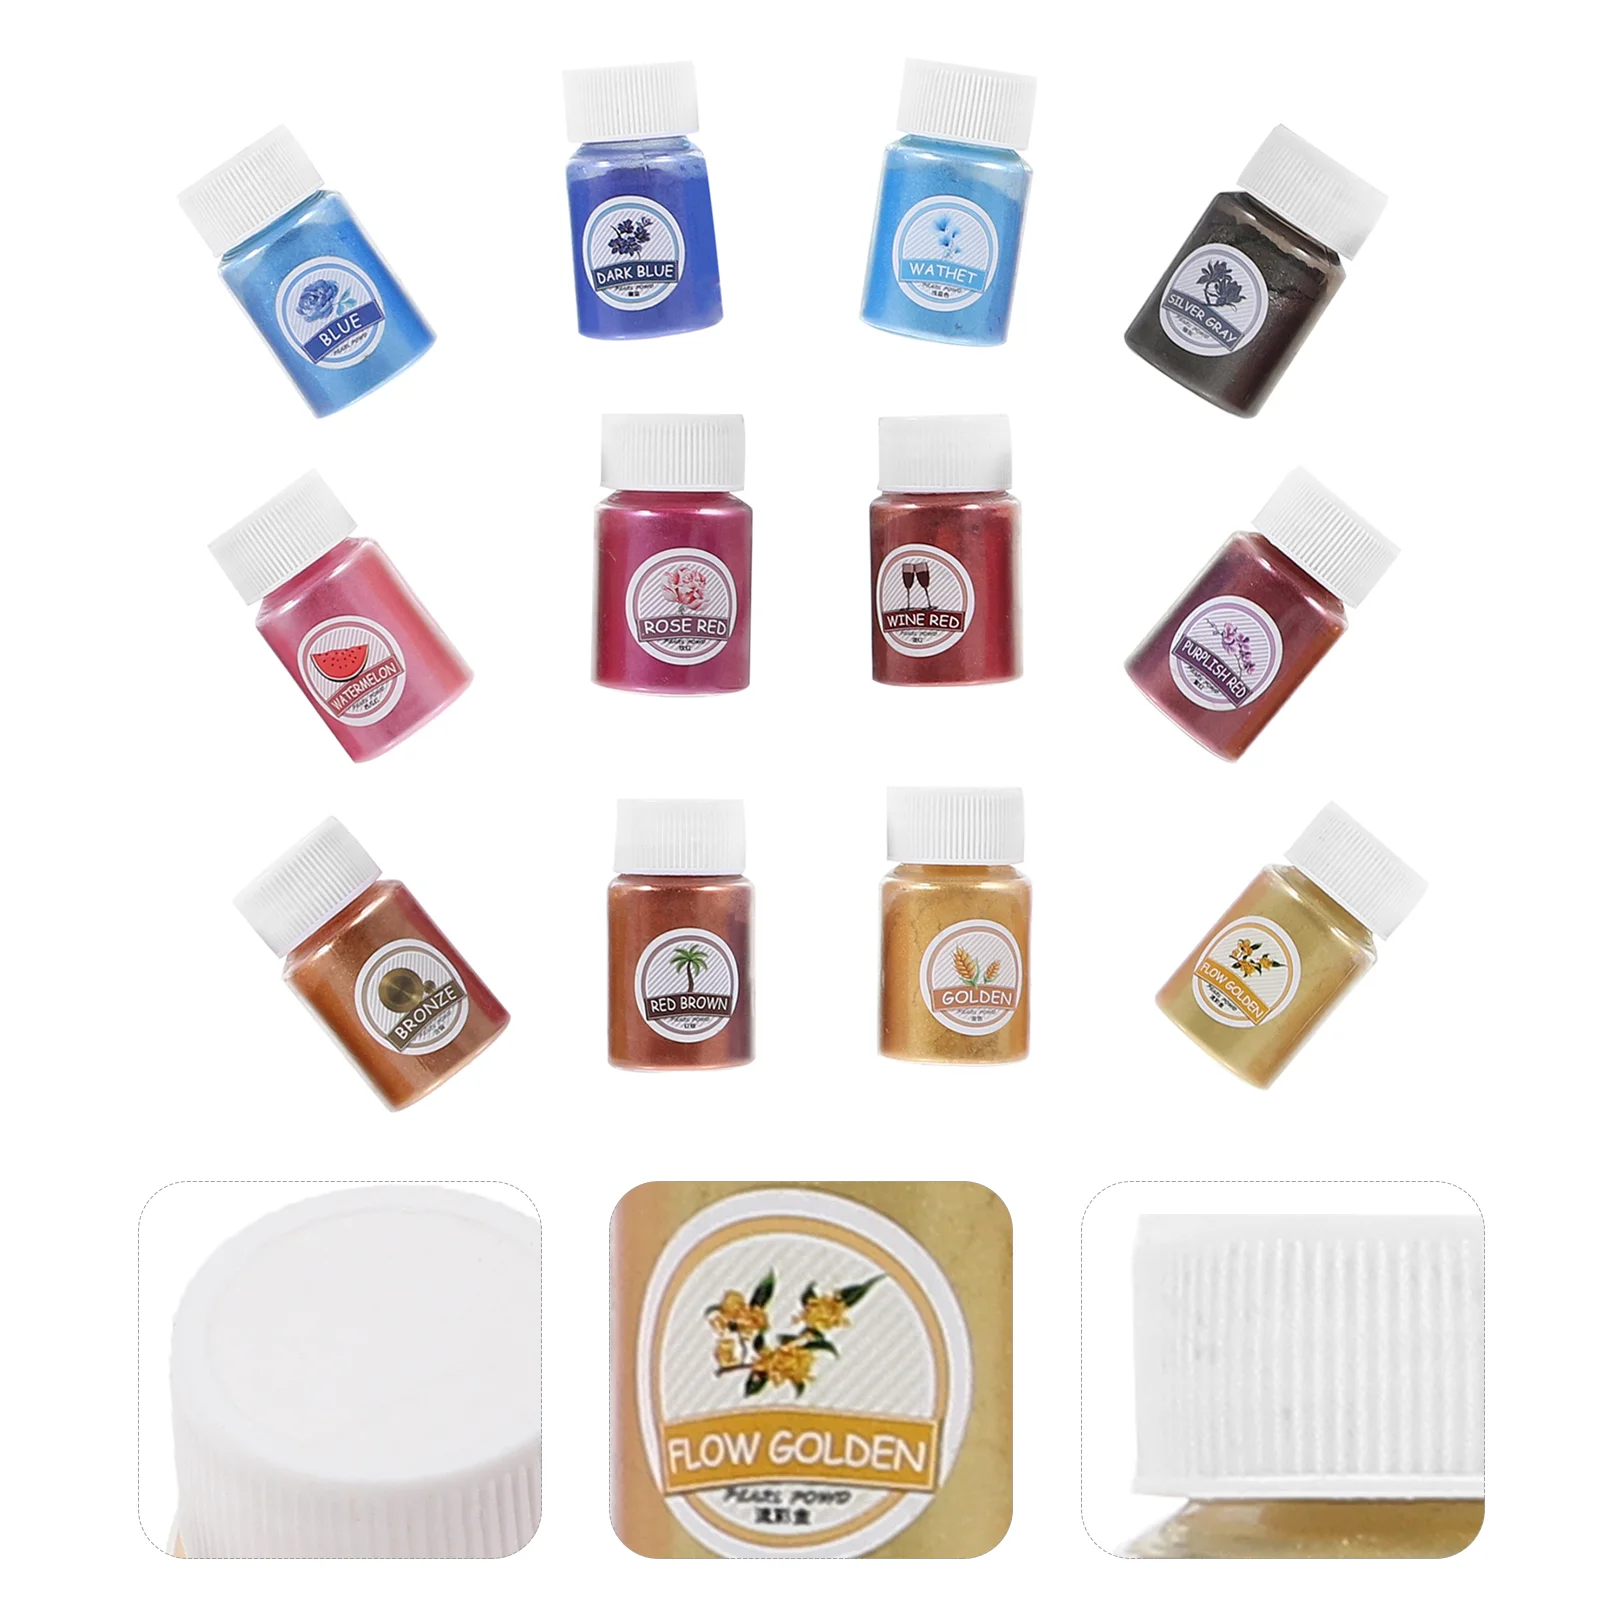 12 Bottles Mica Powder Colored Resin Coloring Multipurpose Drawing Power Crafting Supplies Pigment Powders Materials